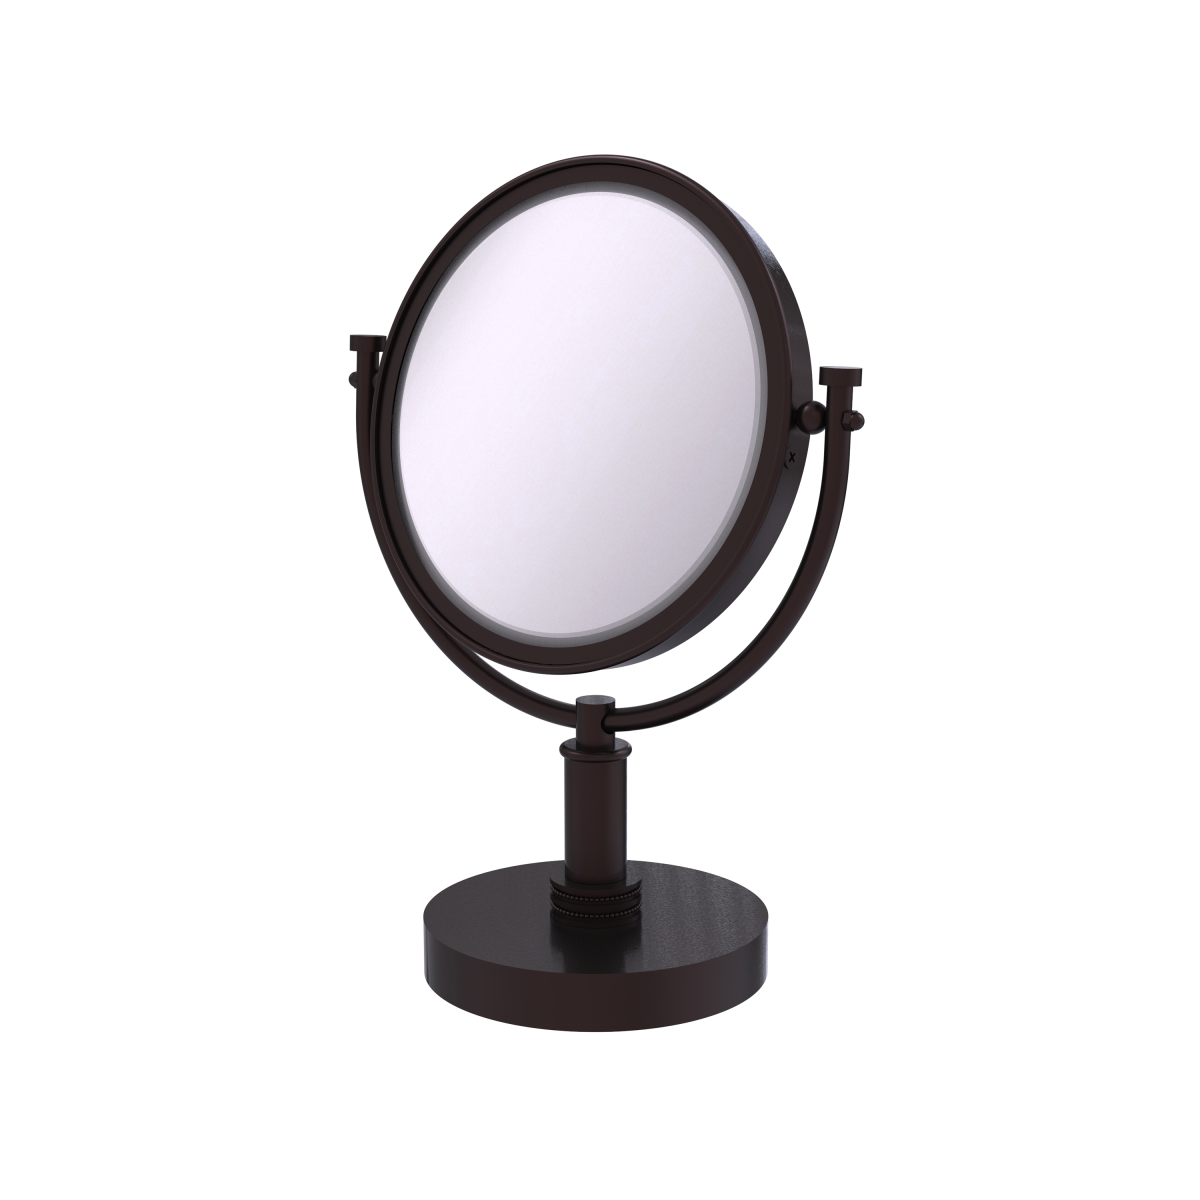 Dm-4d-5x-abz Dotted Ring Style 8 In. Vanity Top Make-up Mirror 5x Magnification, Antique Bronze